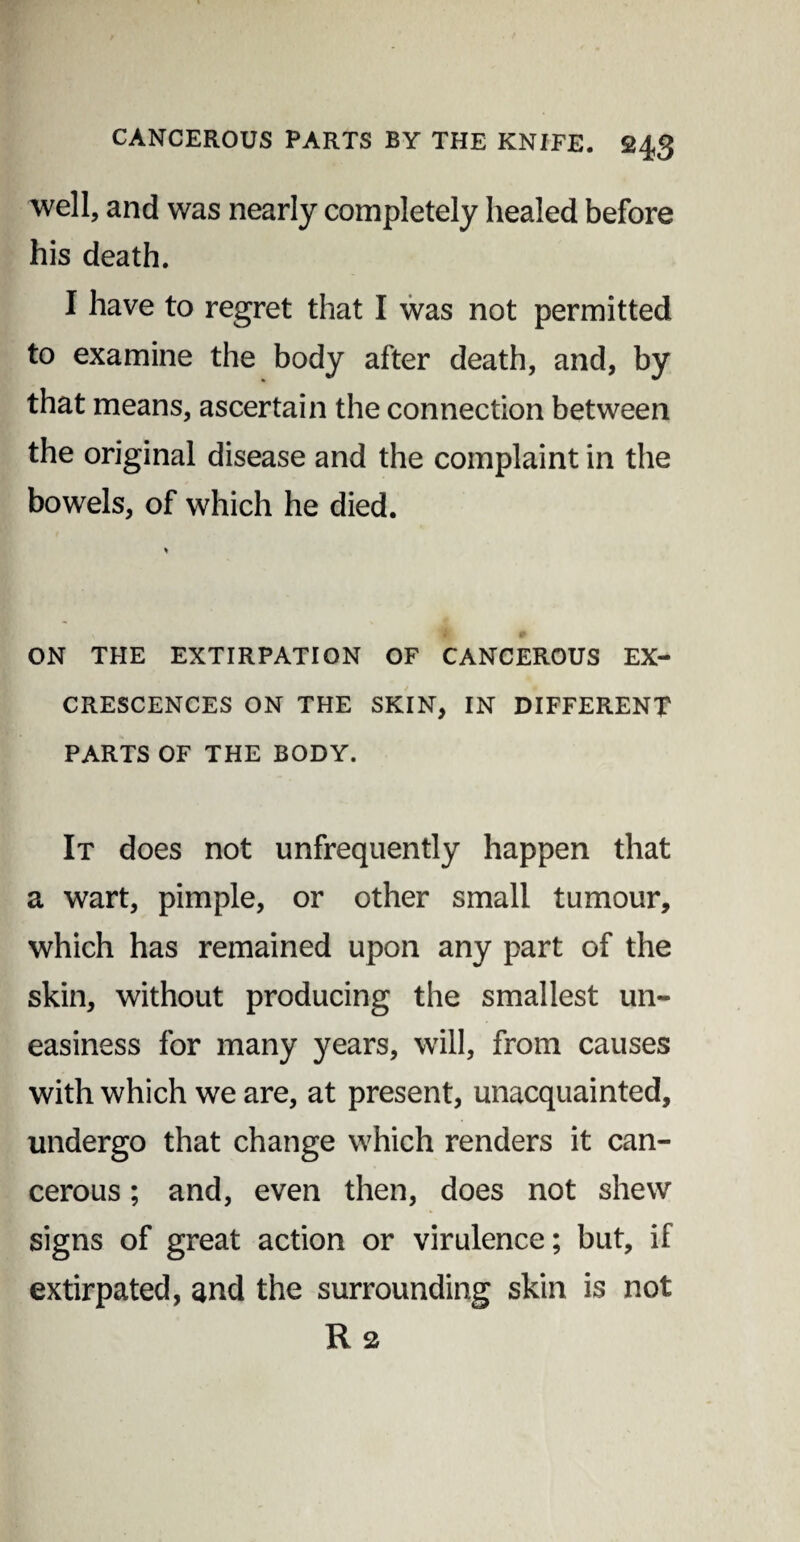 well, and was nearly completely healed before his death. I have to regret that I was not permitted to examine the body after death, and, by that means, ascertain the connection between the original disease and the complaint in the bowels, of which he died. % ON THE EXTIRPATION OF CANCEROUS EX¬ CRESCENCES ON THE SKIN, IN DIFFERENT PARTS OF THE BODY. It does not unfrequently happen that a wart, pimple, or other small tumour, which has remained upon any part of the skin, without producing the smallest un¬ easiness for many years, will, from causes with which we are, at present, unacquainted, undergo that change which renders it can¬ cerous ; and, even then, does not shew signs of great action or virulence; but, if extirpated, and the surrounding skin is not R 2